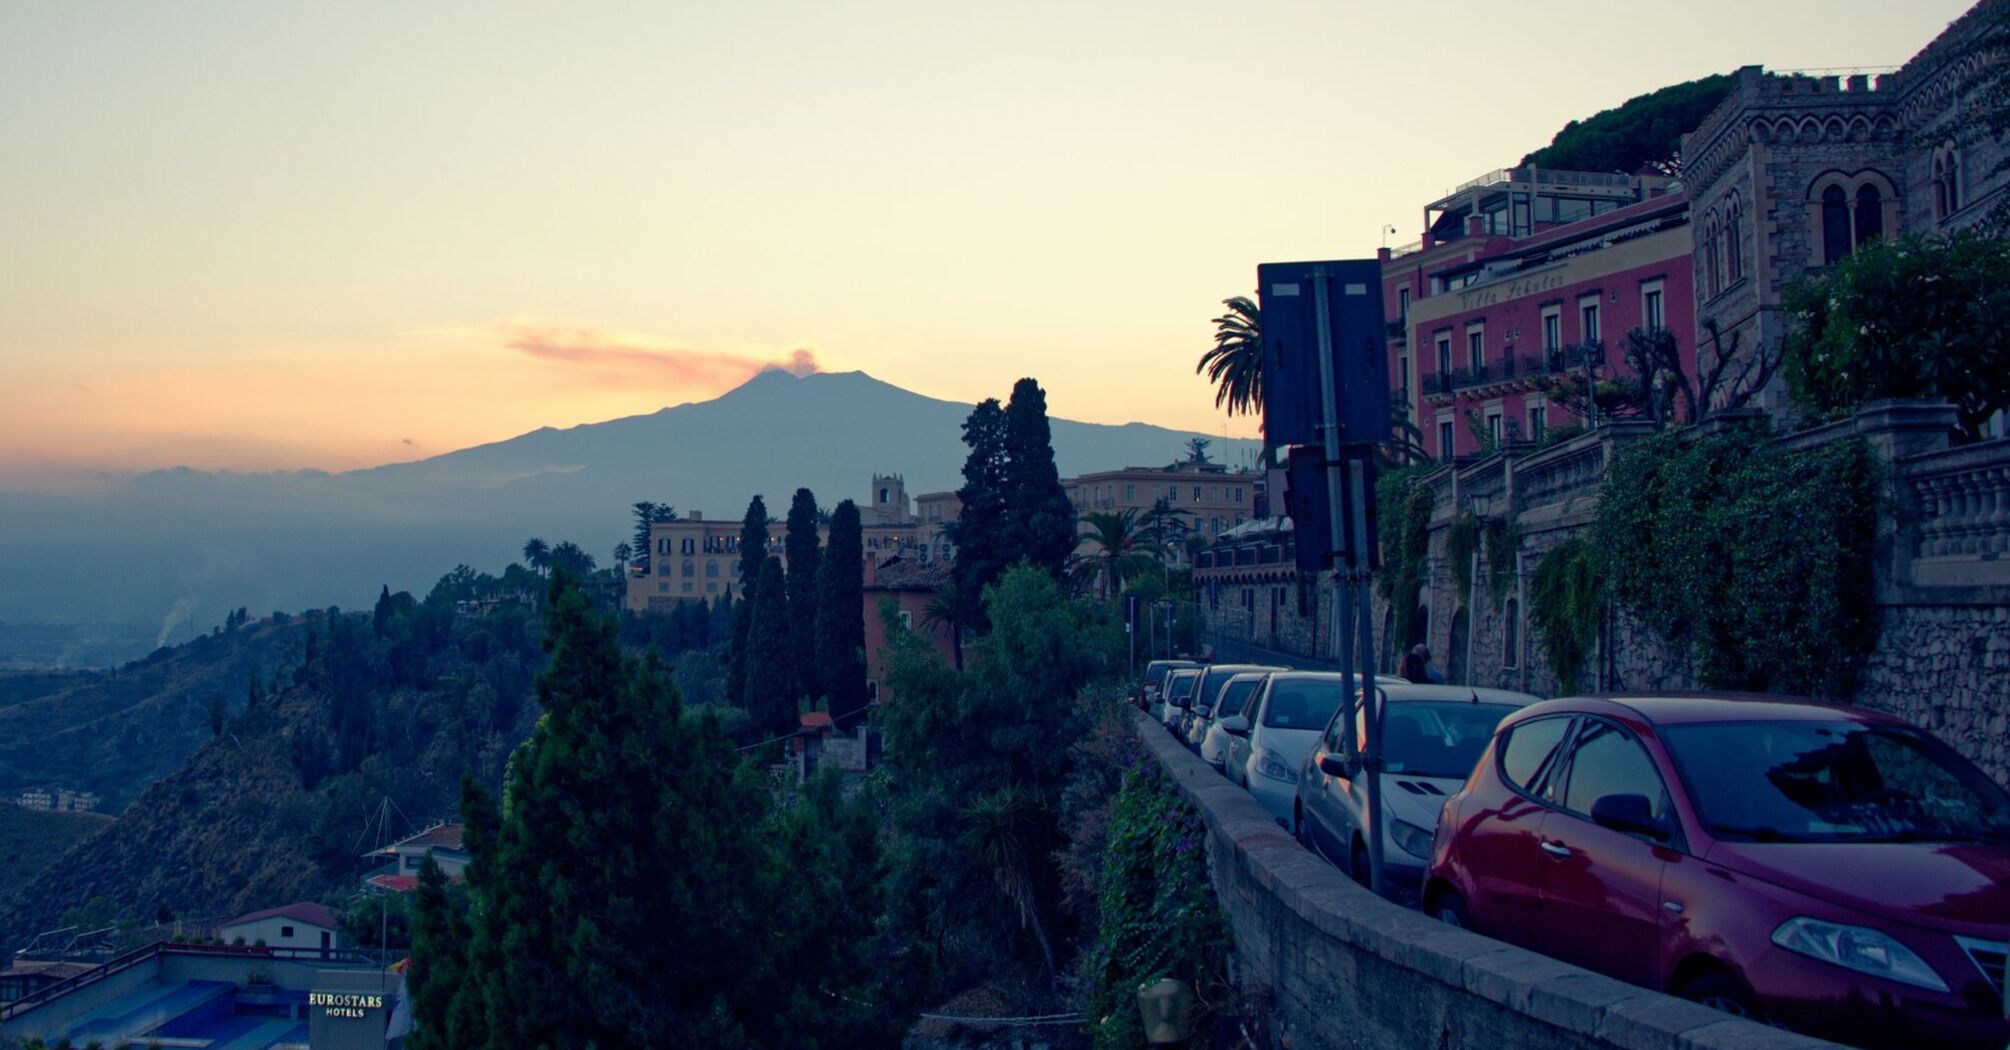 View of a hillside town in Italy with mountains in the background at sunset